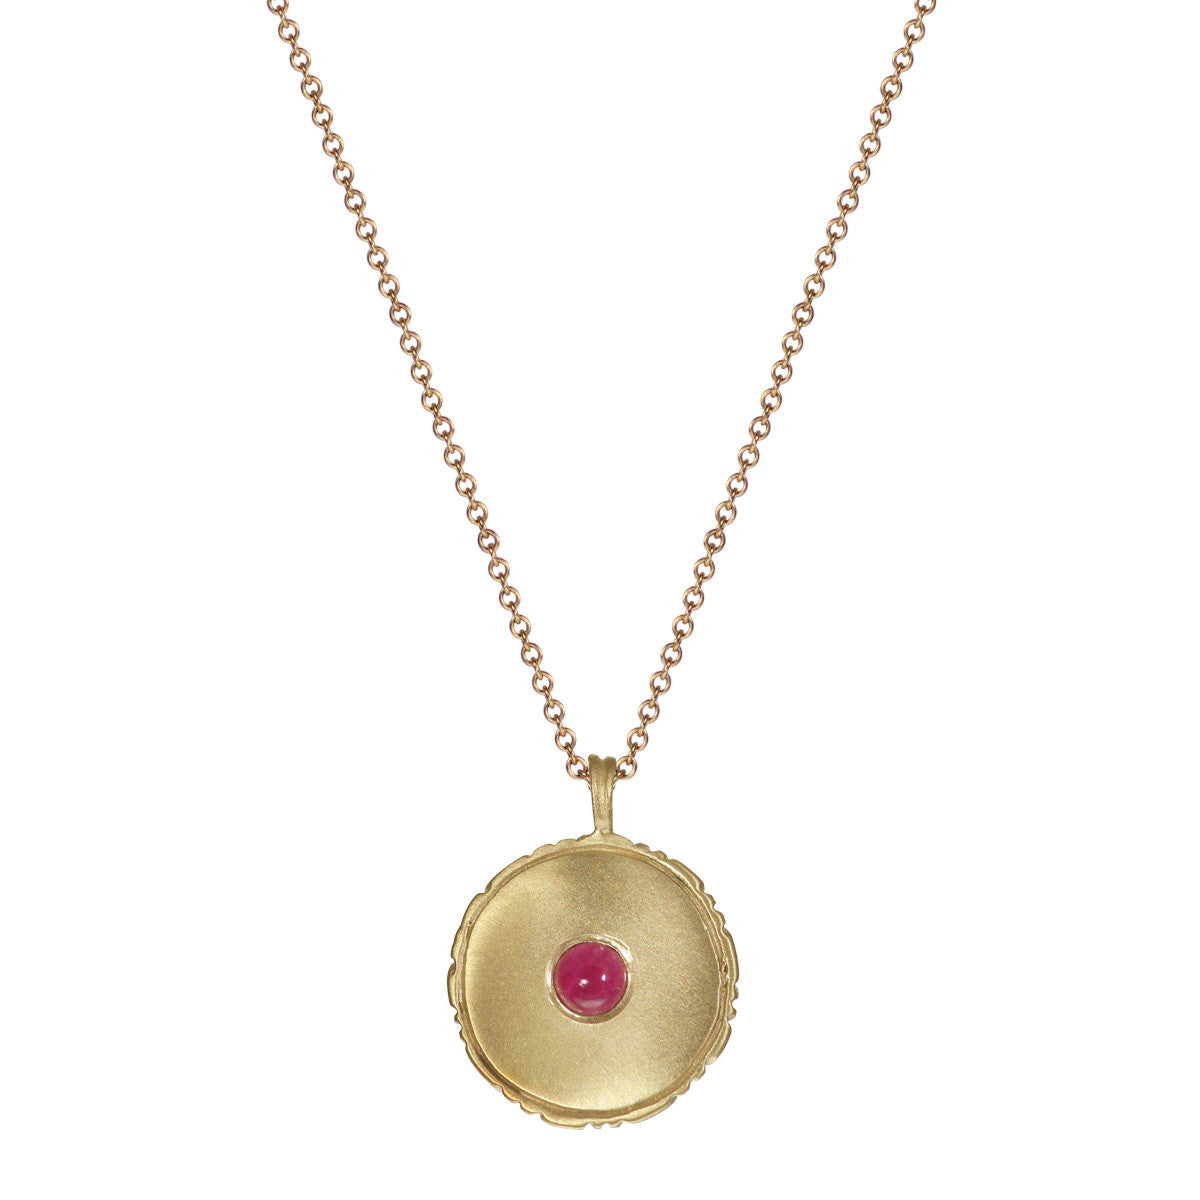 10K Gold Strength is Having a Graceful Life Pendant with Ruby